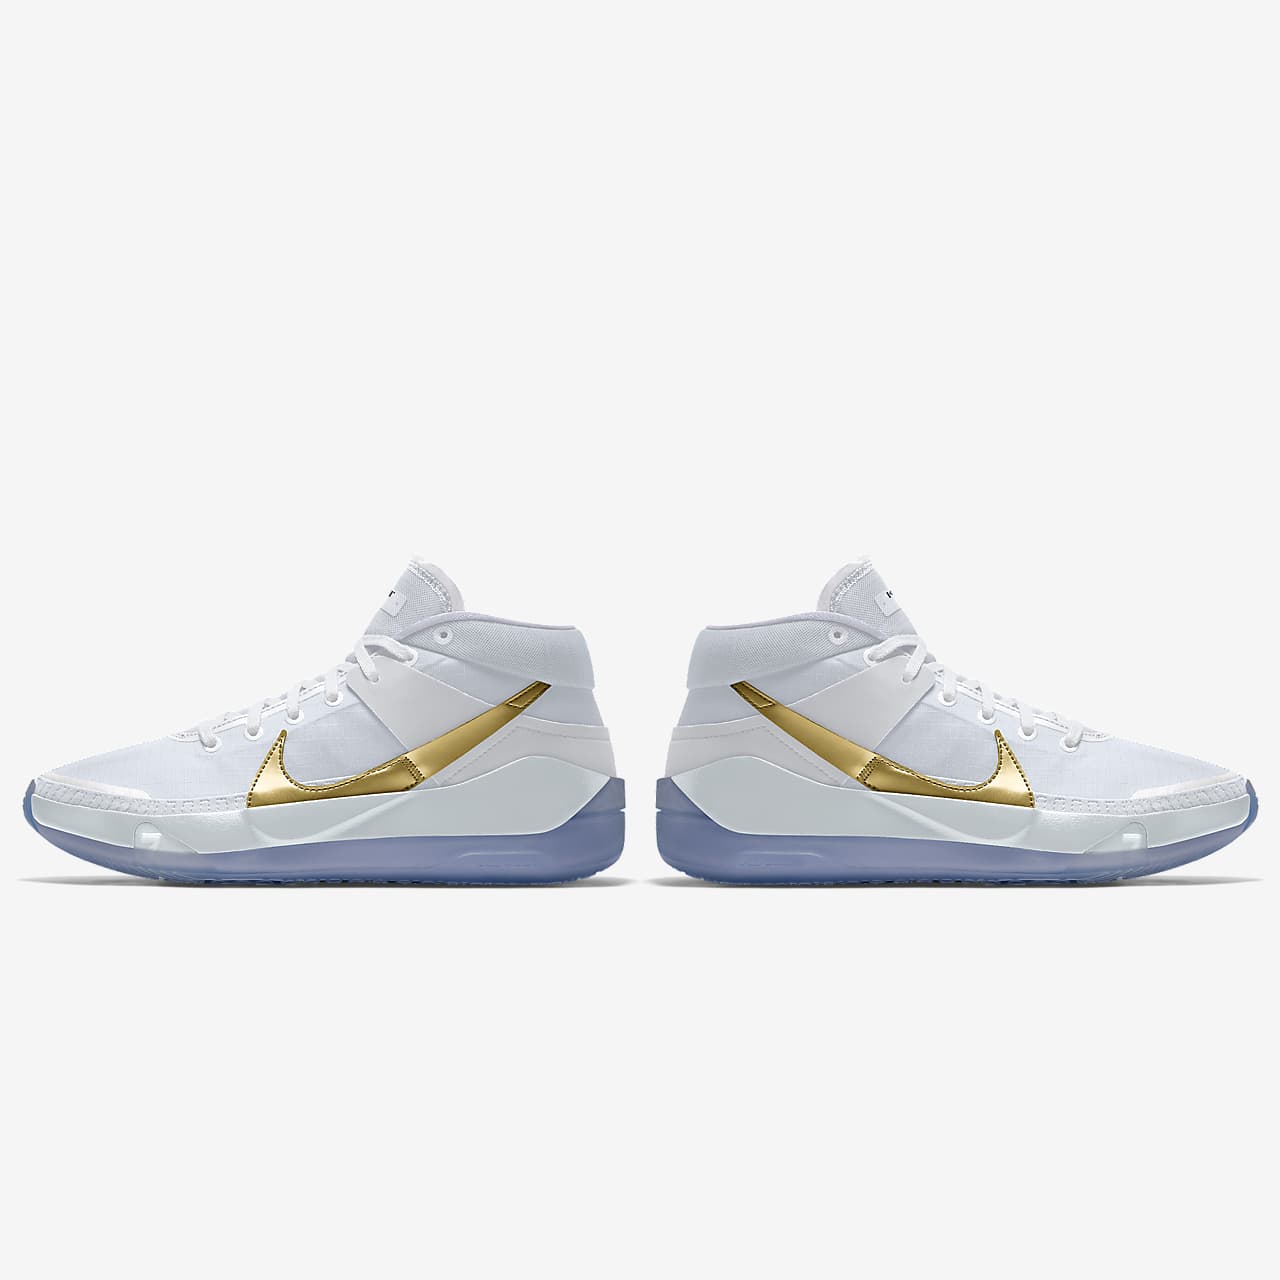 nike by you kd 13